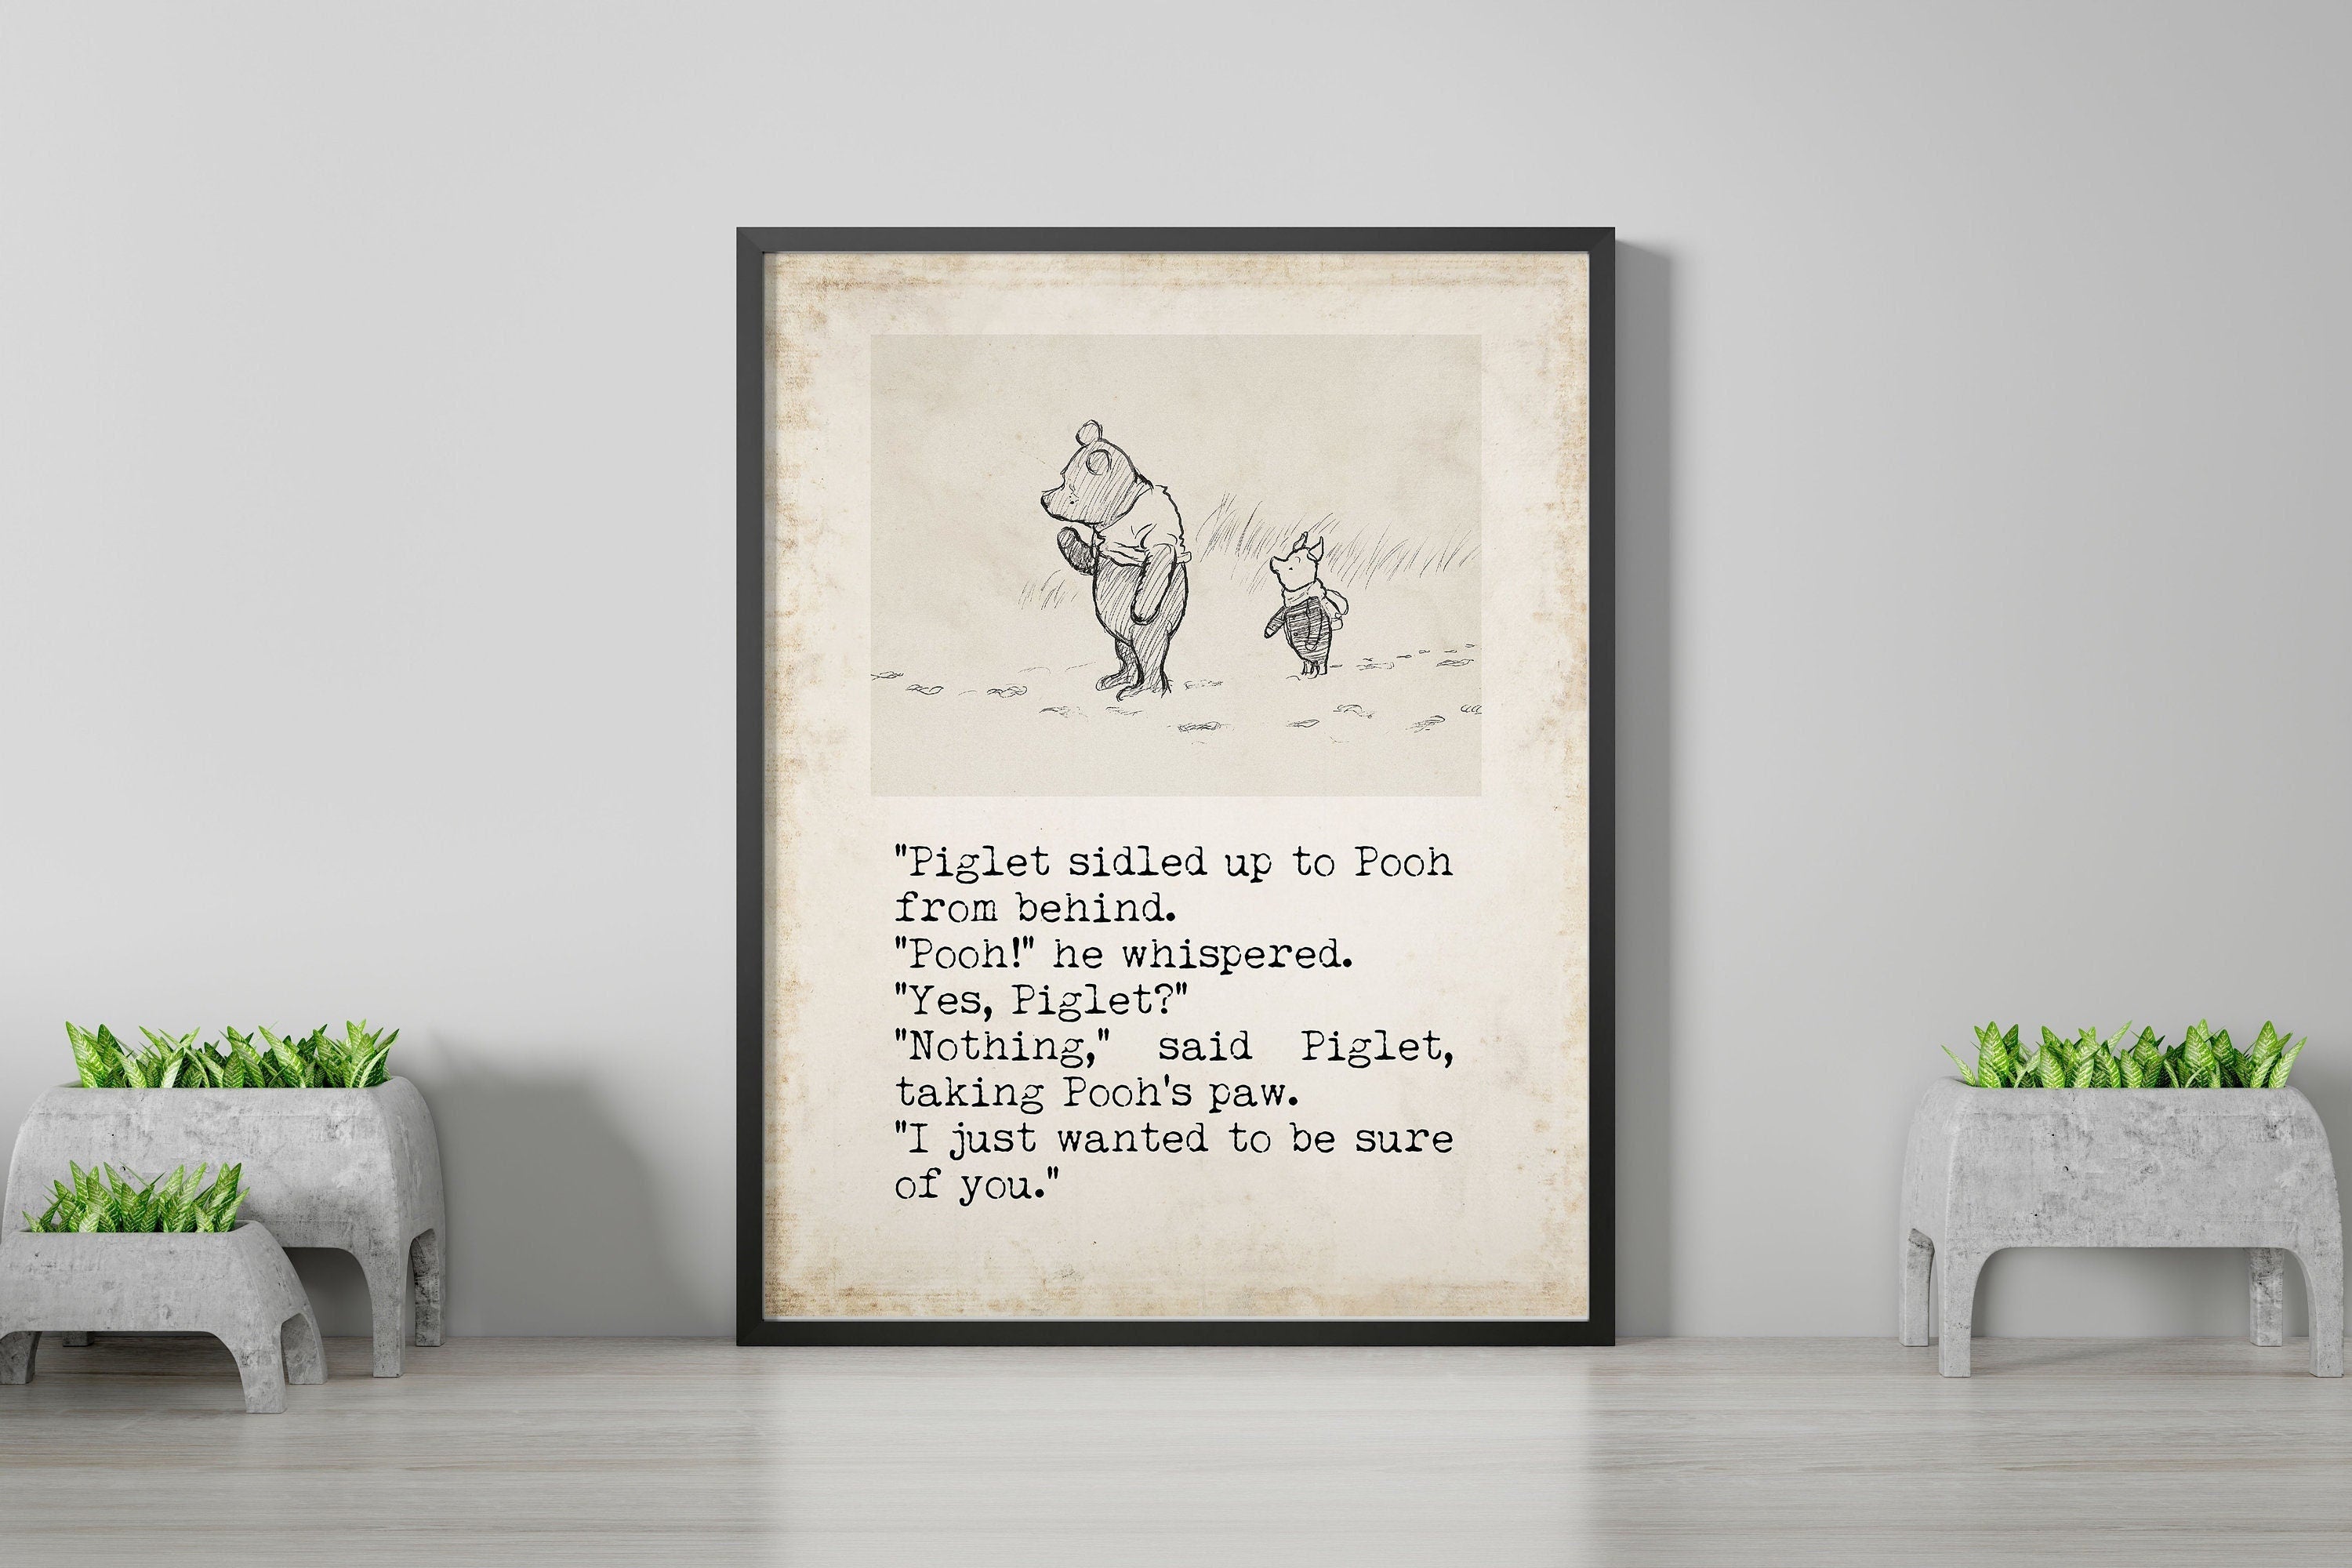 The House at Pooh Corner Winnie the Pooh Quote Unframed or Framed Nursery Wall Art Prints in Vintage Style with Pooh & Piglet Drawing